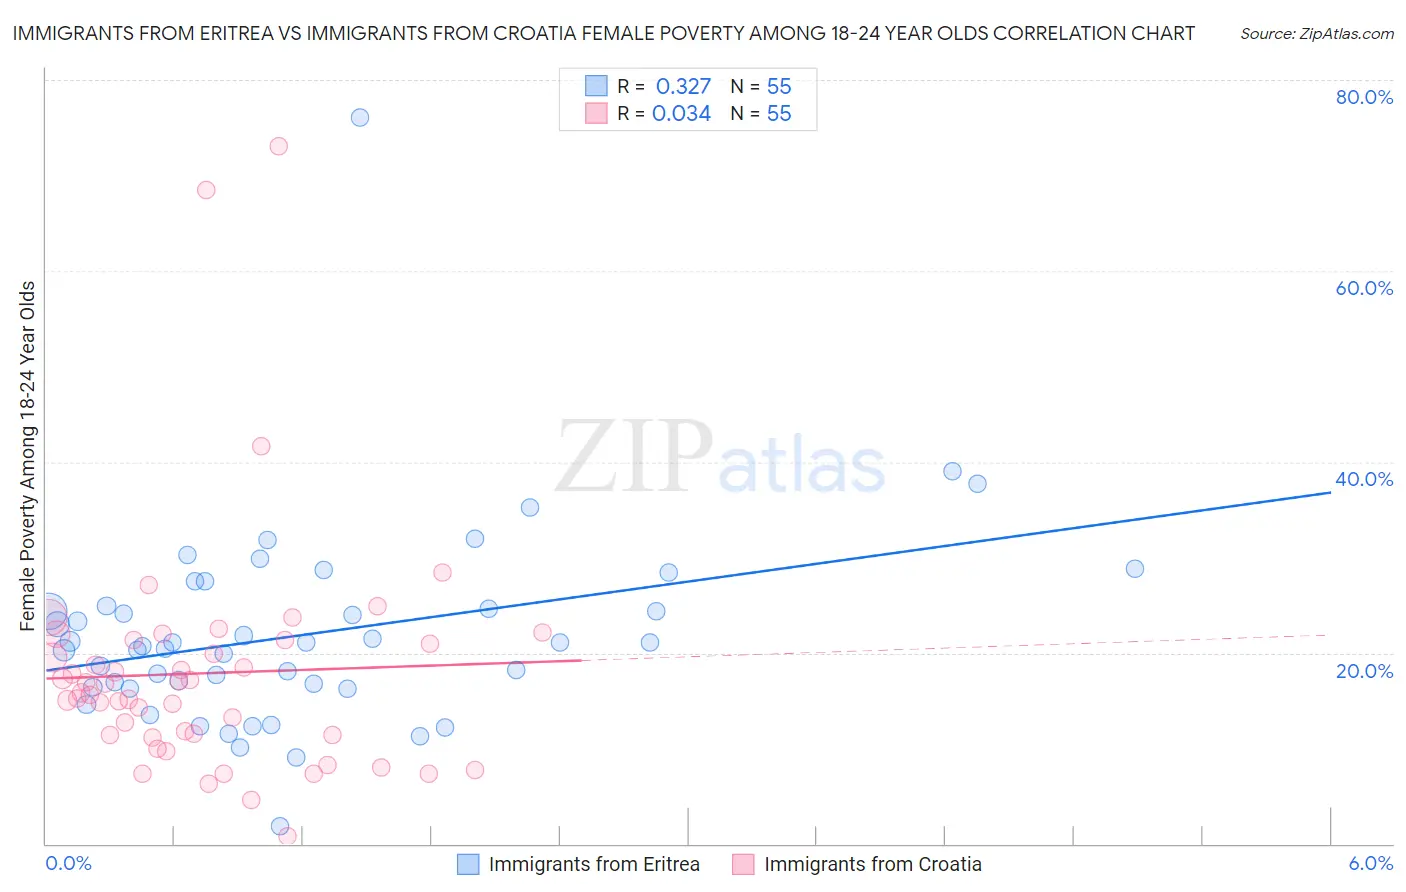 Immigrants from Eritrea vs Immigrants from Croatia Female Poverty Among 18-24 Year Olds